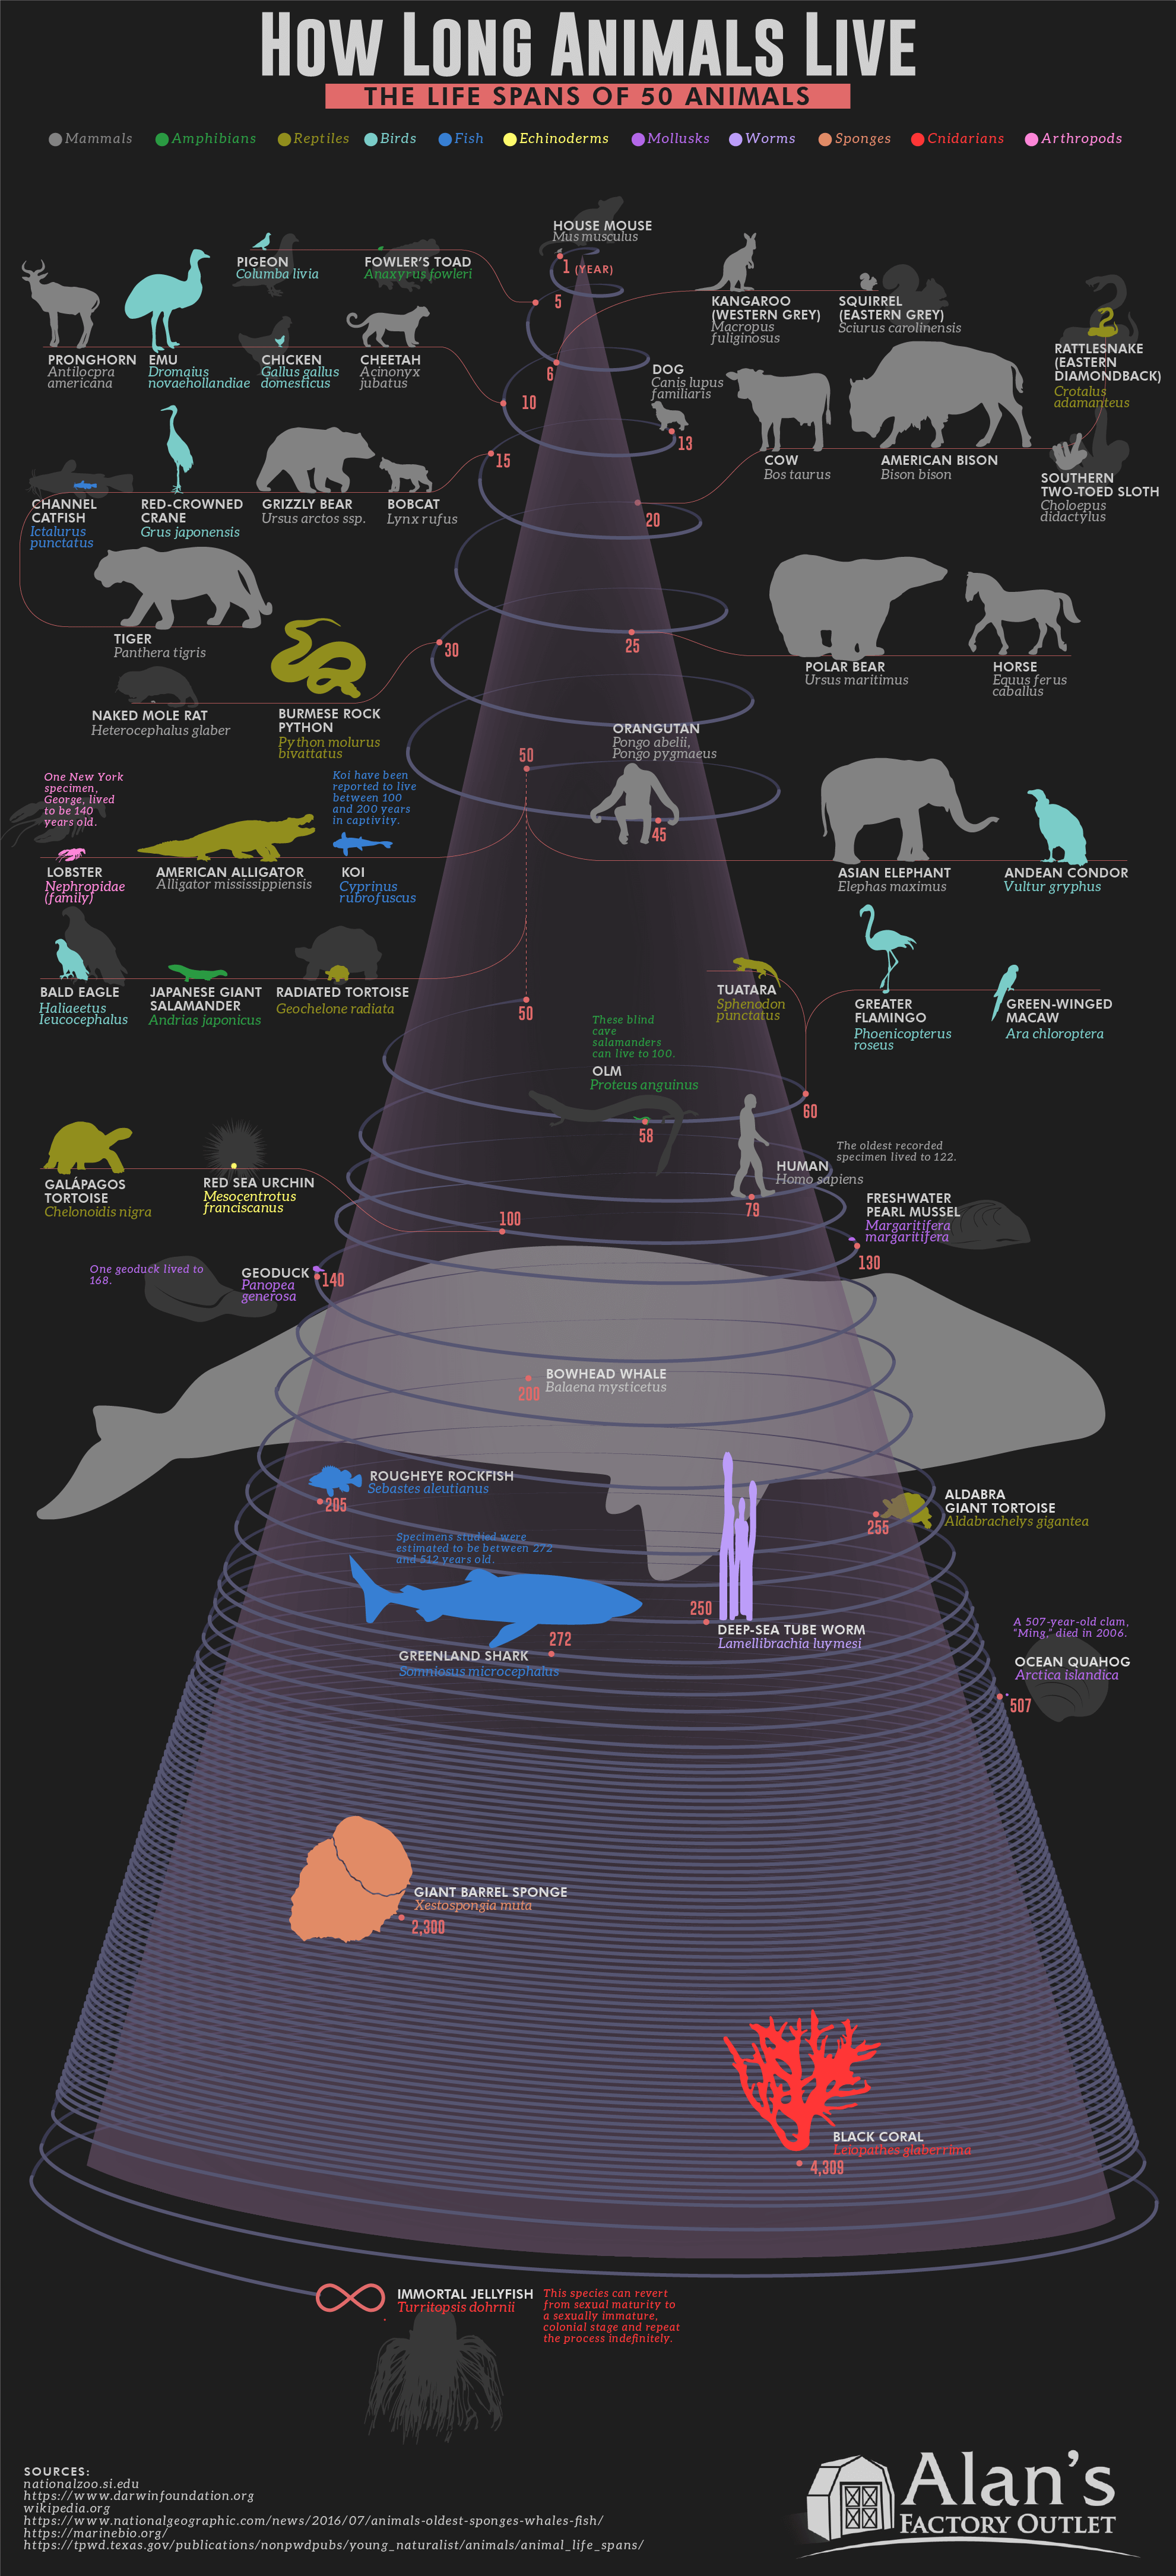 life expectancy of humans compared to animals